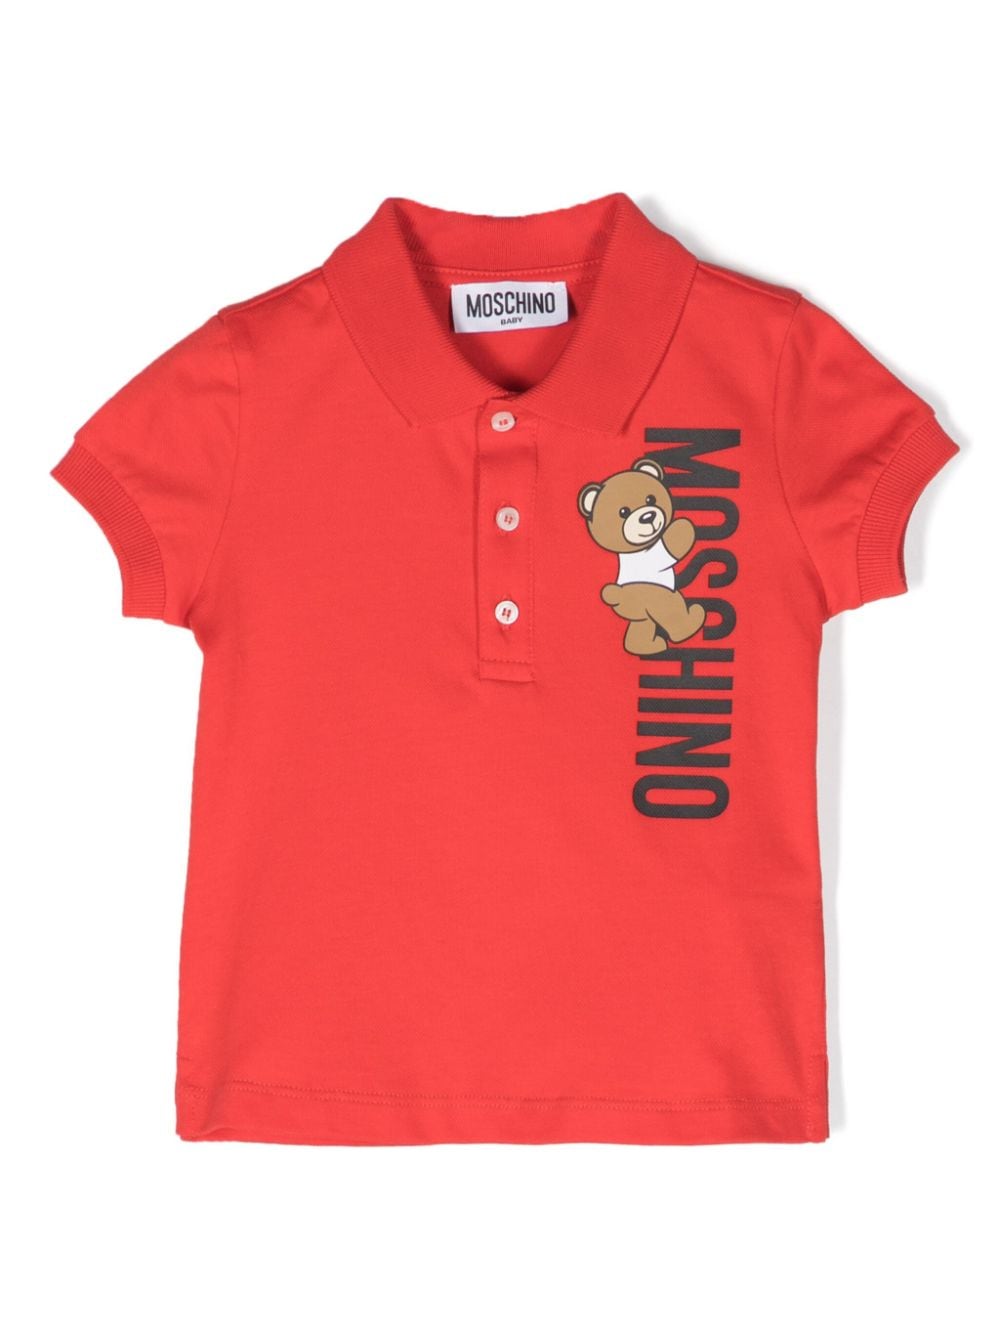 Red polo shirt for newborns with print